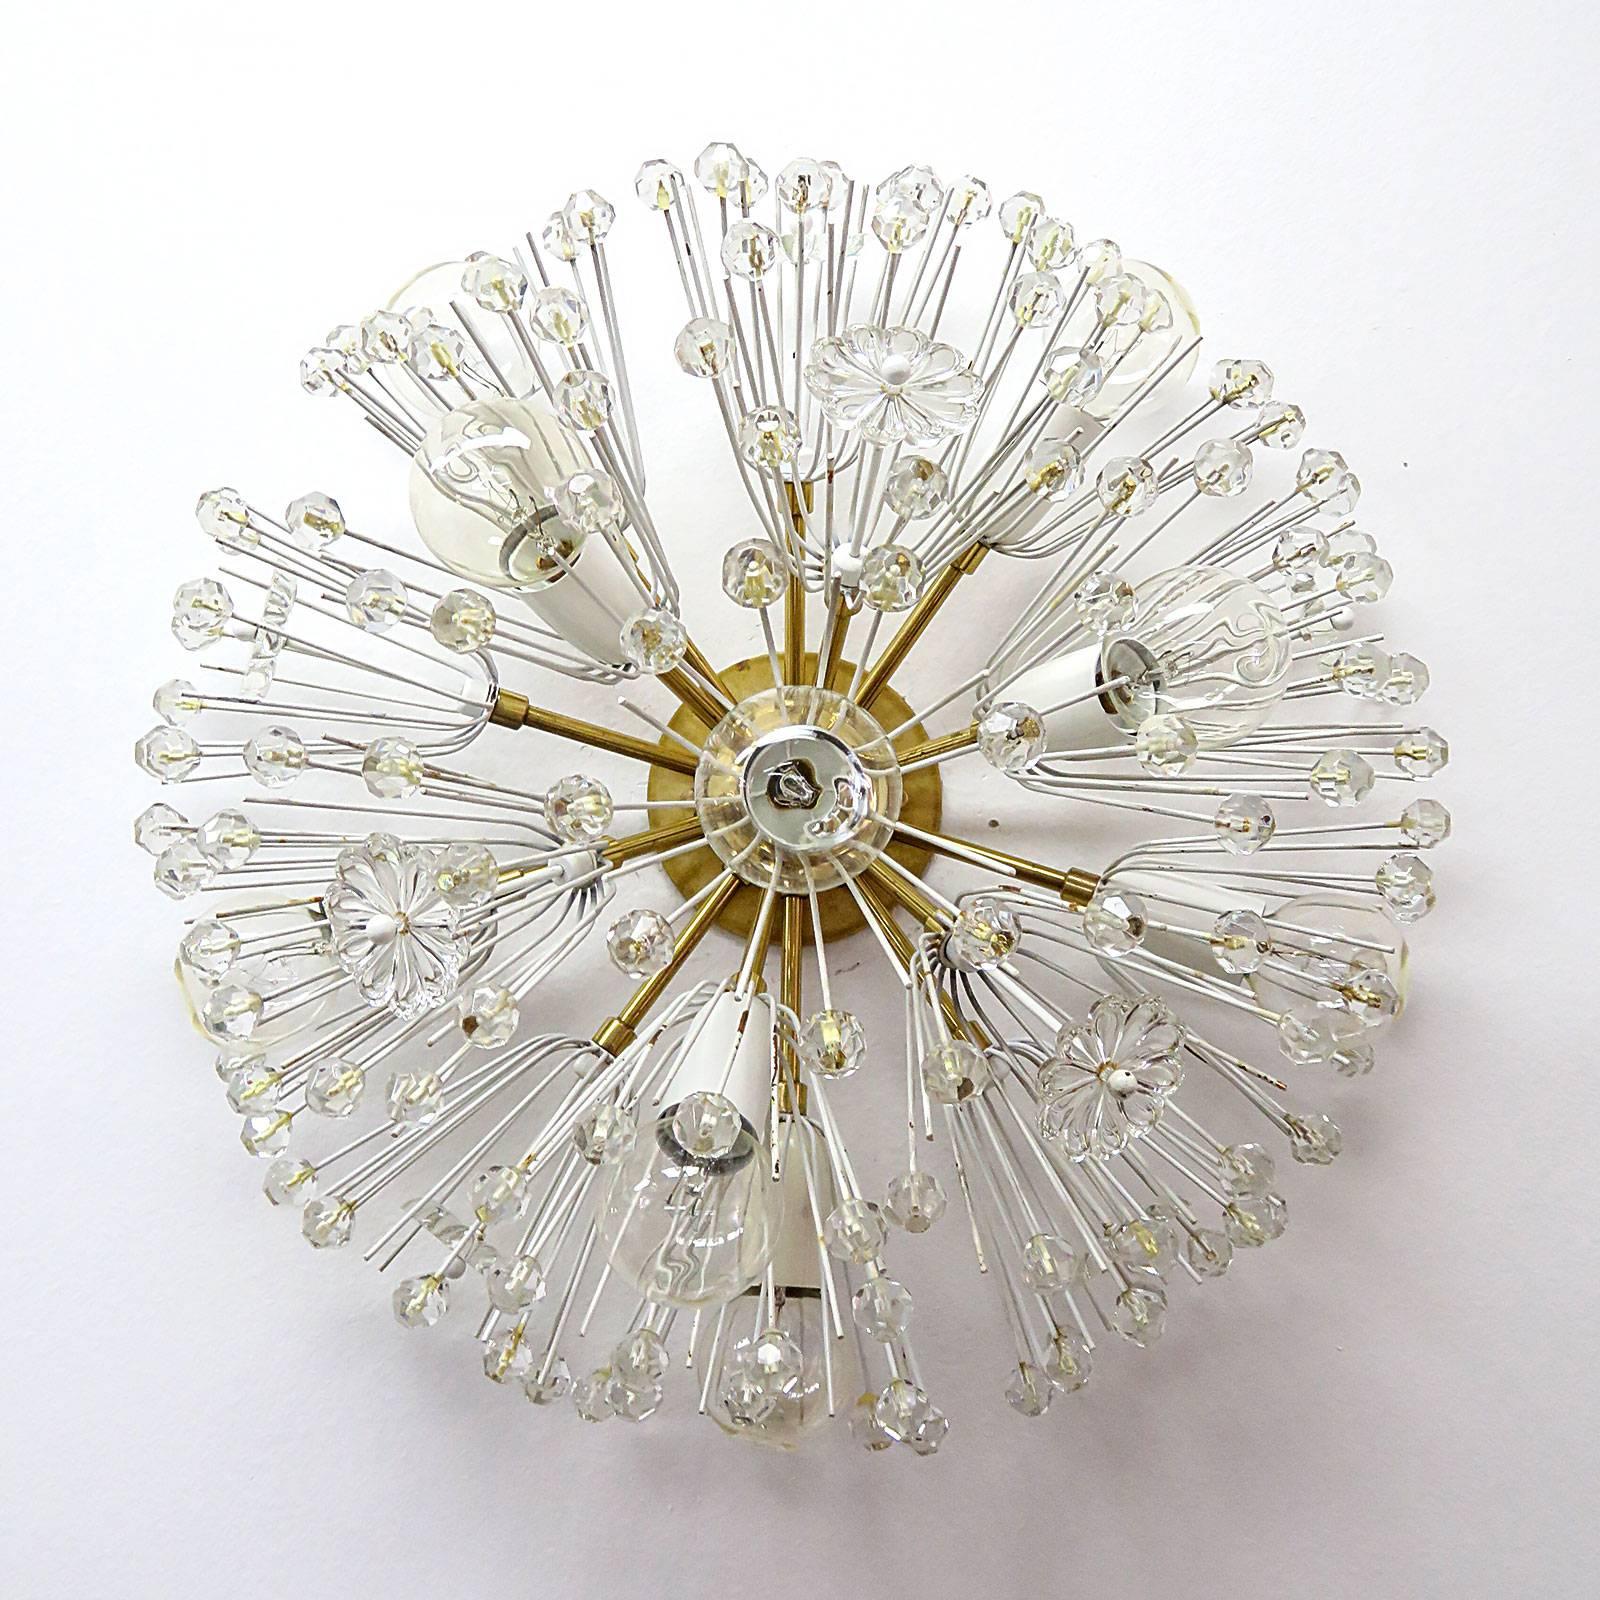 Beautiful and delicate nine-light brass fixture with copious amounts of Austrian crystals by Emil Stejnar for Nikoll, can be wall or ceiling mounted.